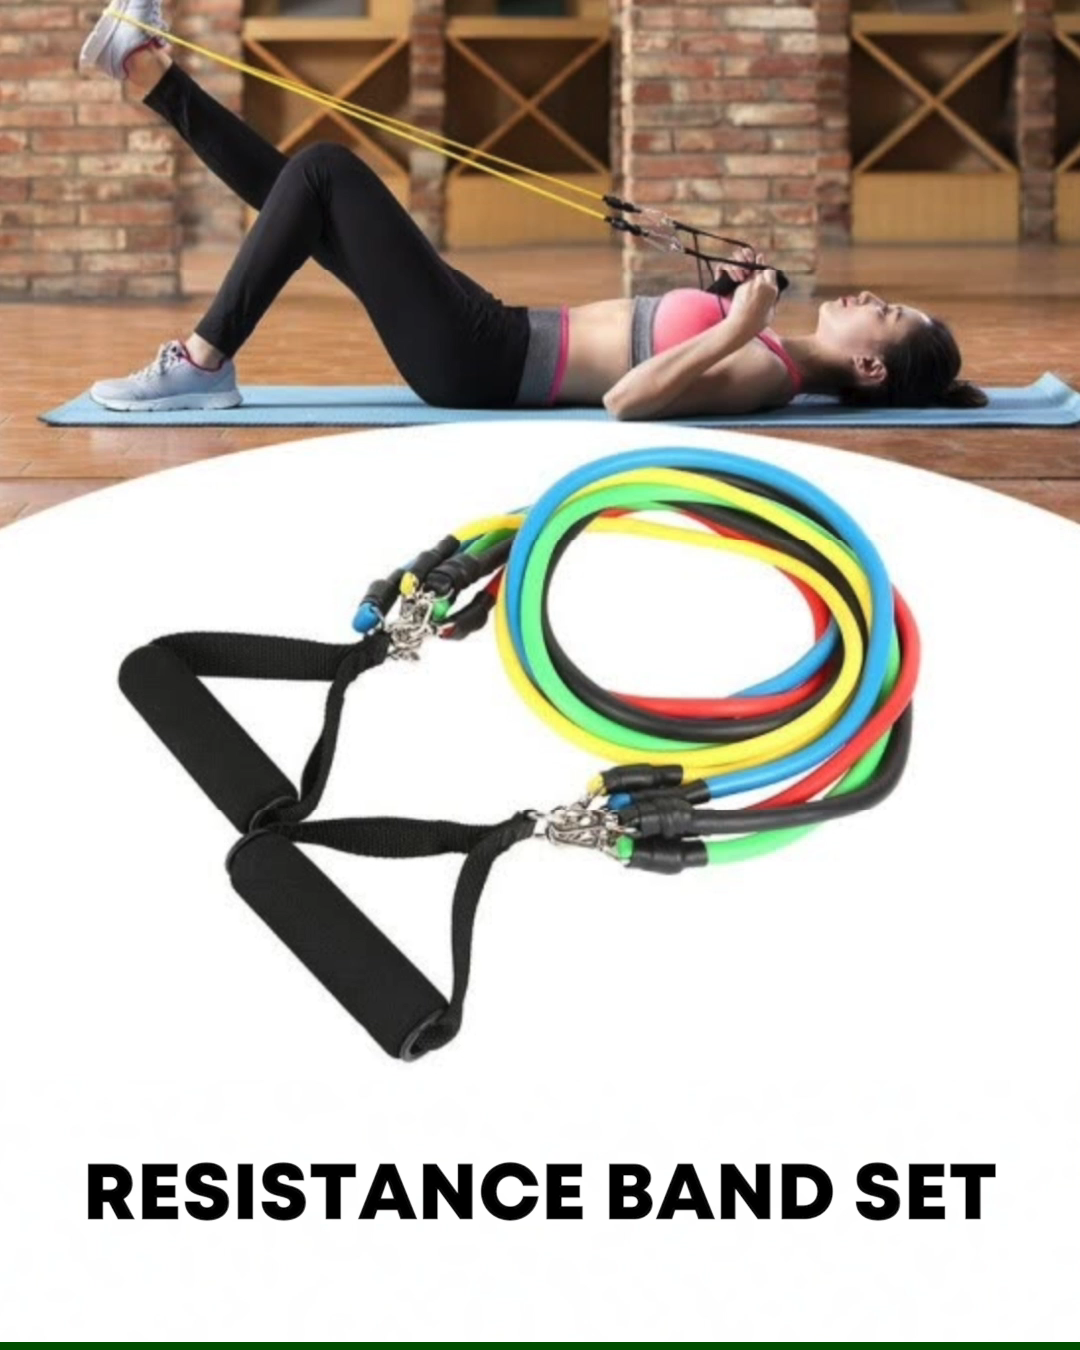 Resistance Band Set - Resistance Band Set -   15 fitness Equipment products ideas